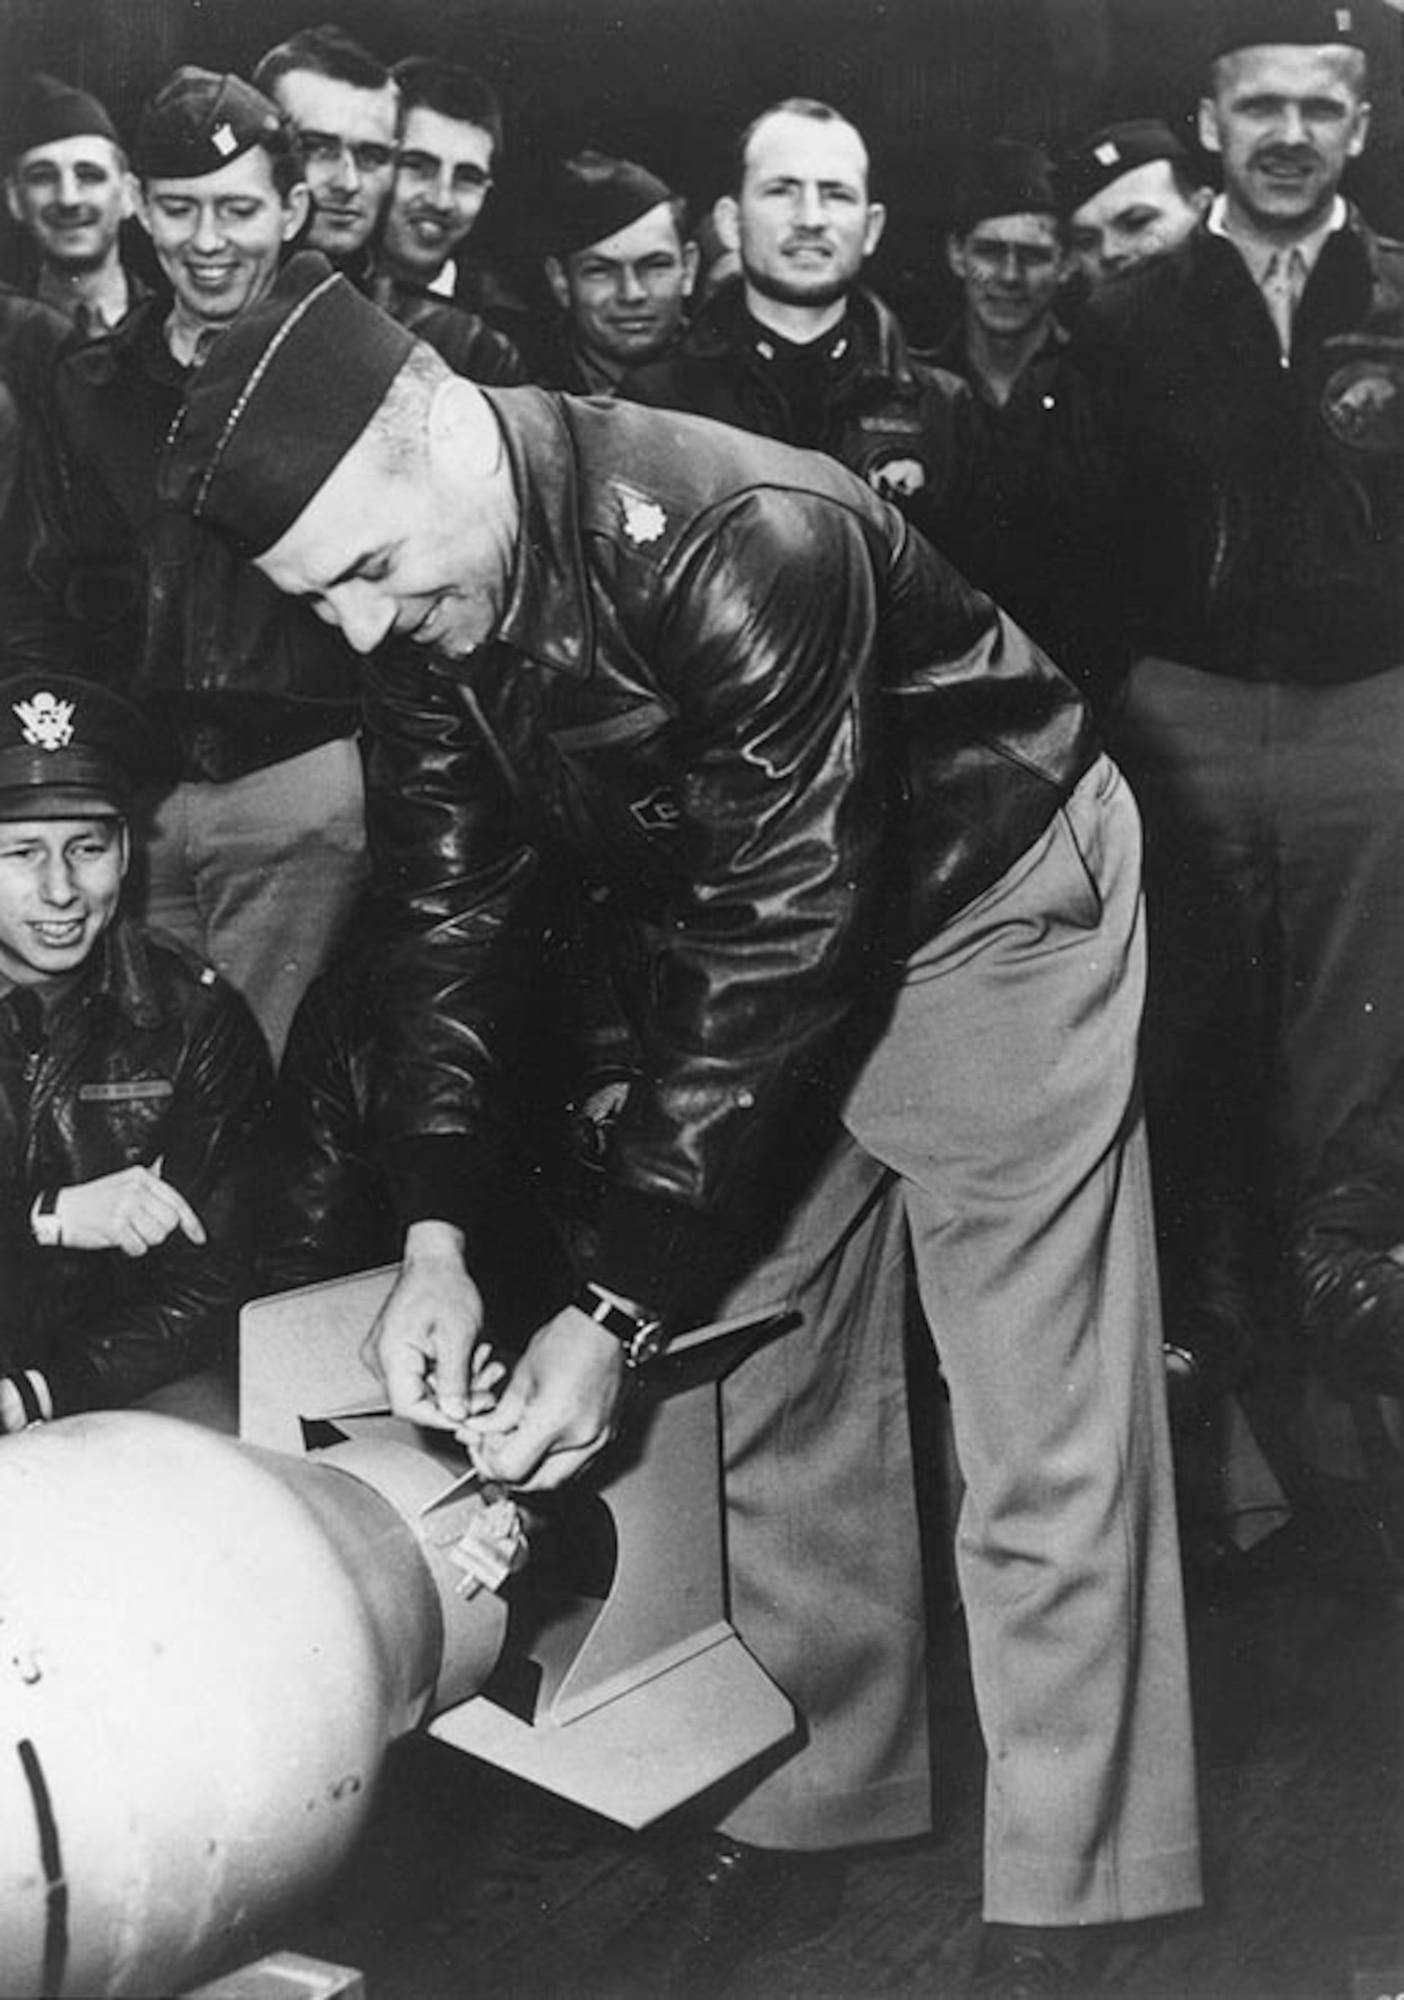 Lieutenant Colonel Doolittle wires a Japanese "Friendship Medal" to a bomb, for "return" to its originators during the "Doolittle Raid" on Japan five months after the Japanese attack on Pearl Harbor..